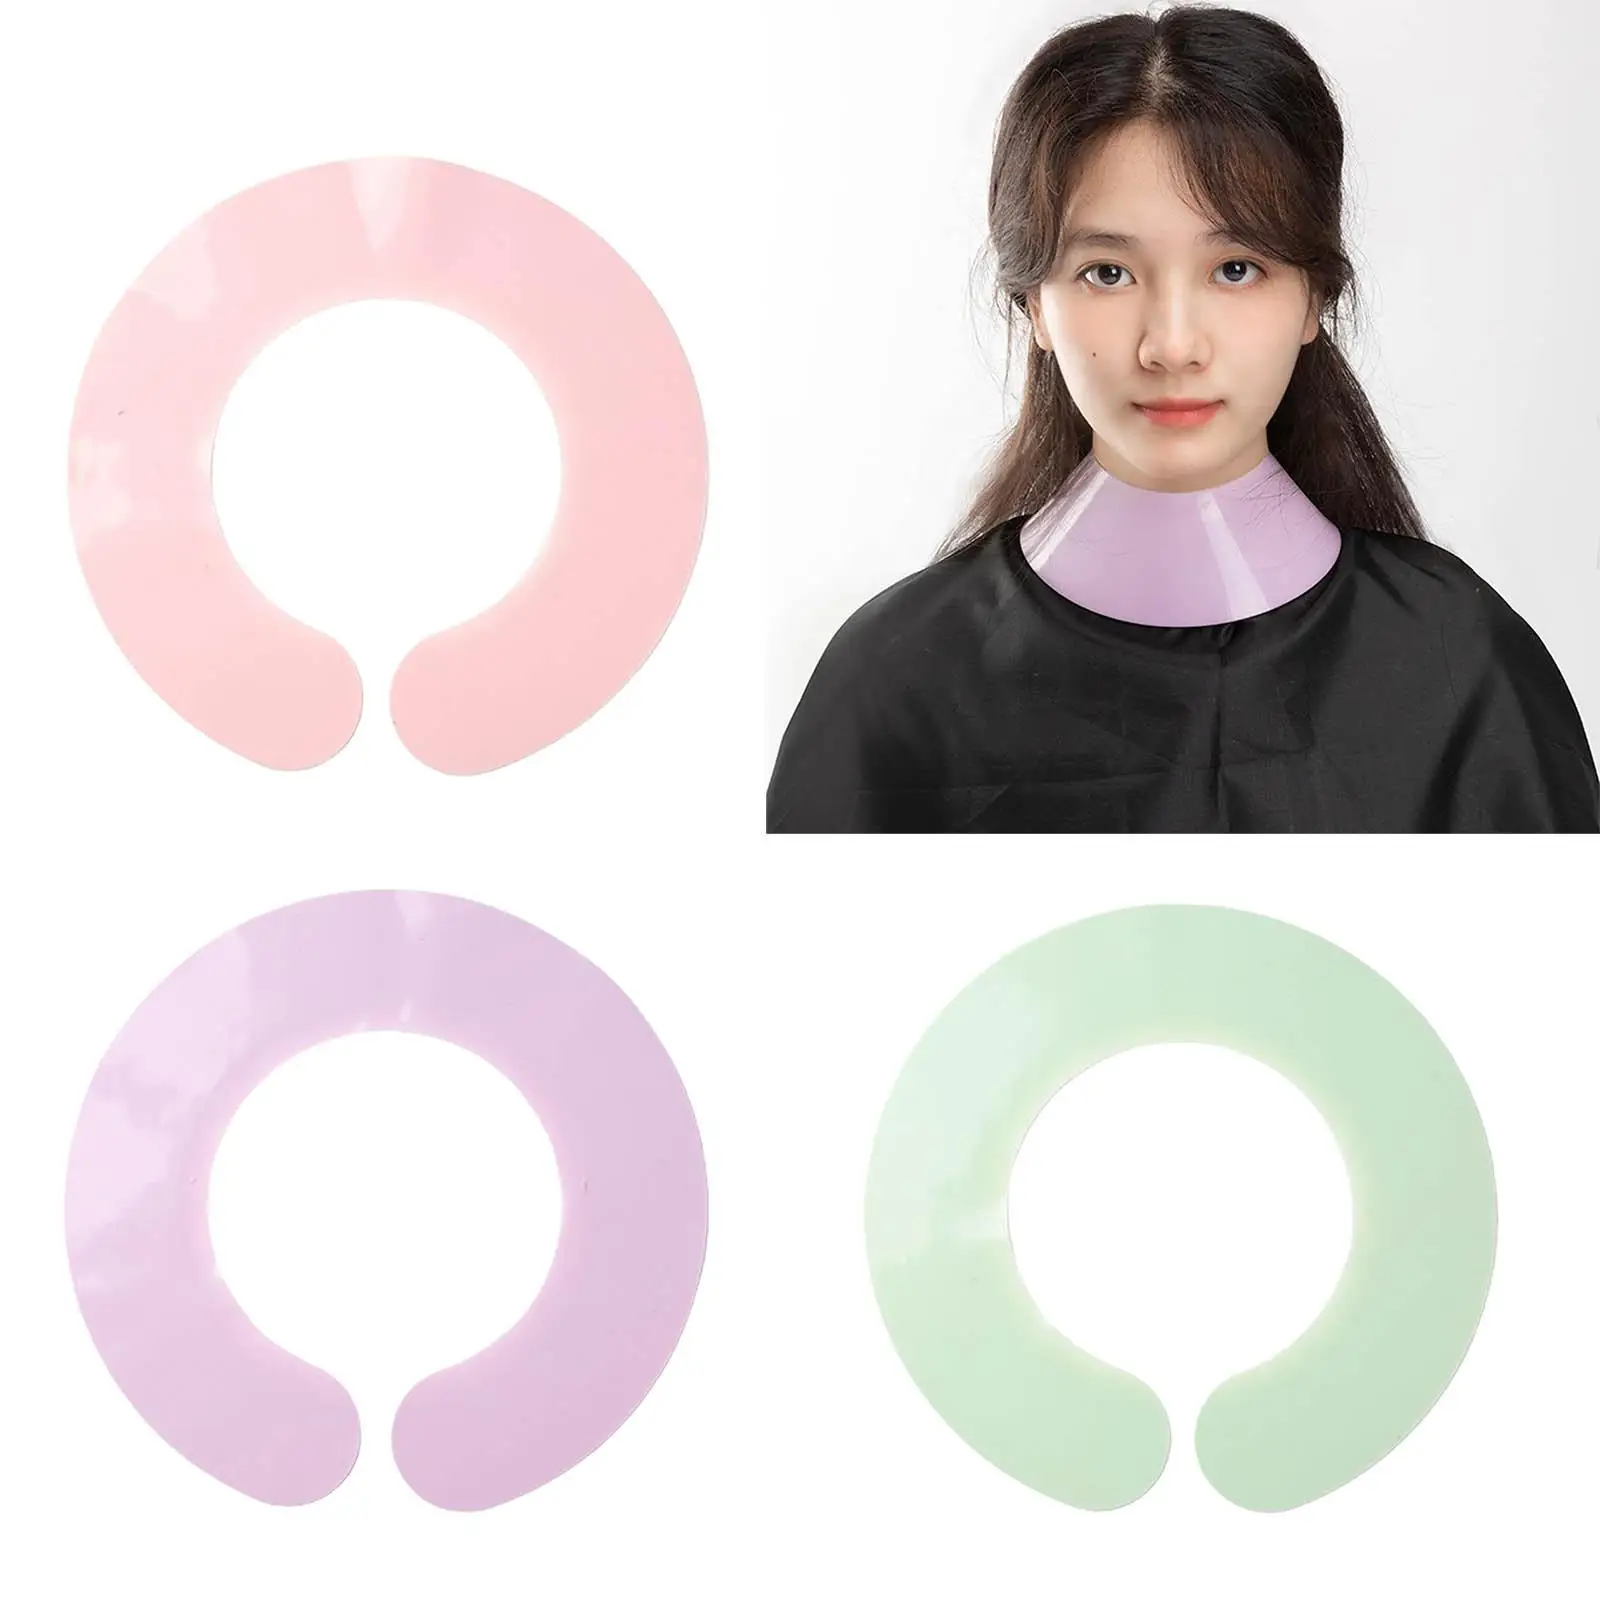 Professional Hair Cutting Collar Silicone Neck Wrap for Hair Dye Hair Coloring for Adults Kids Neck Shawl Adjustable Closure